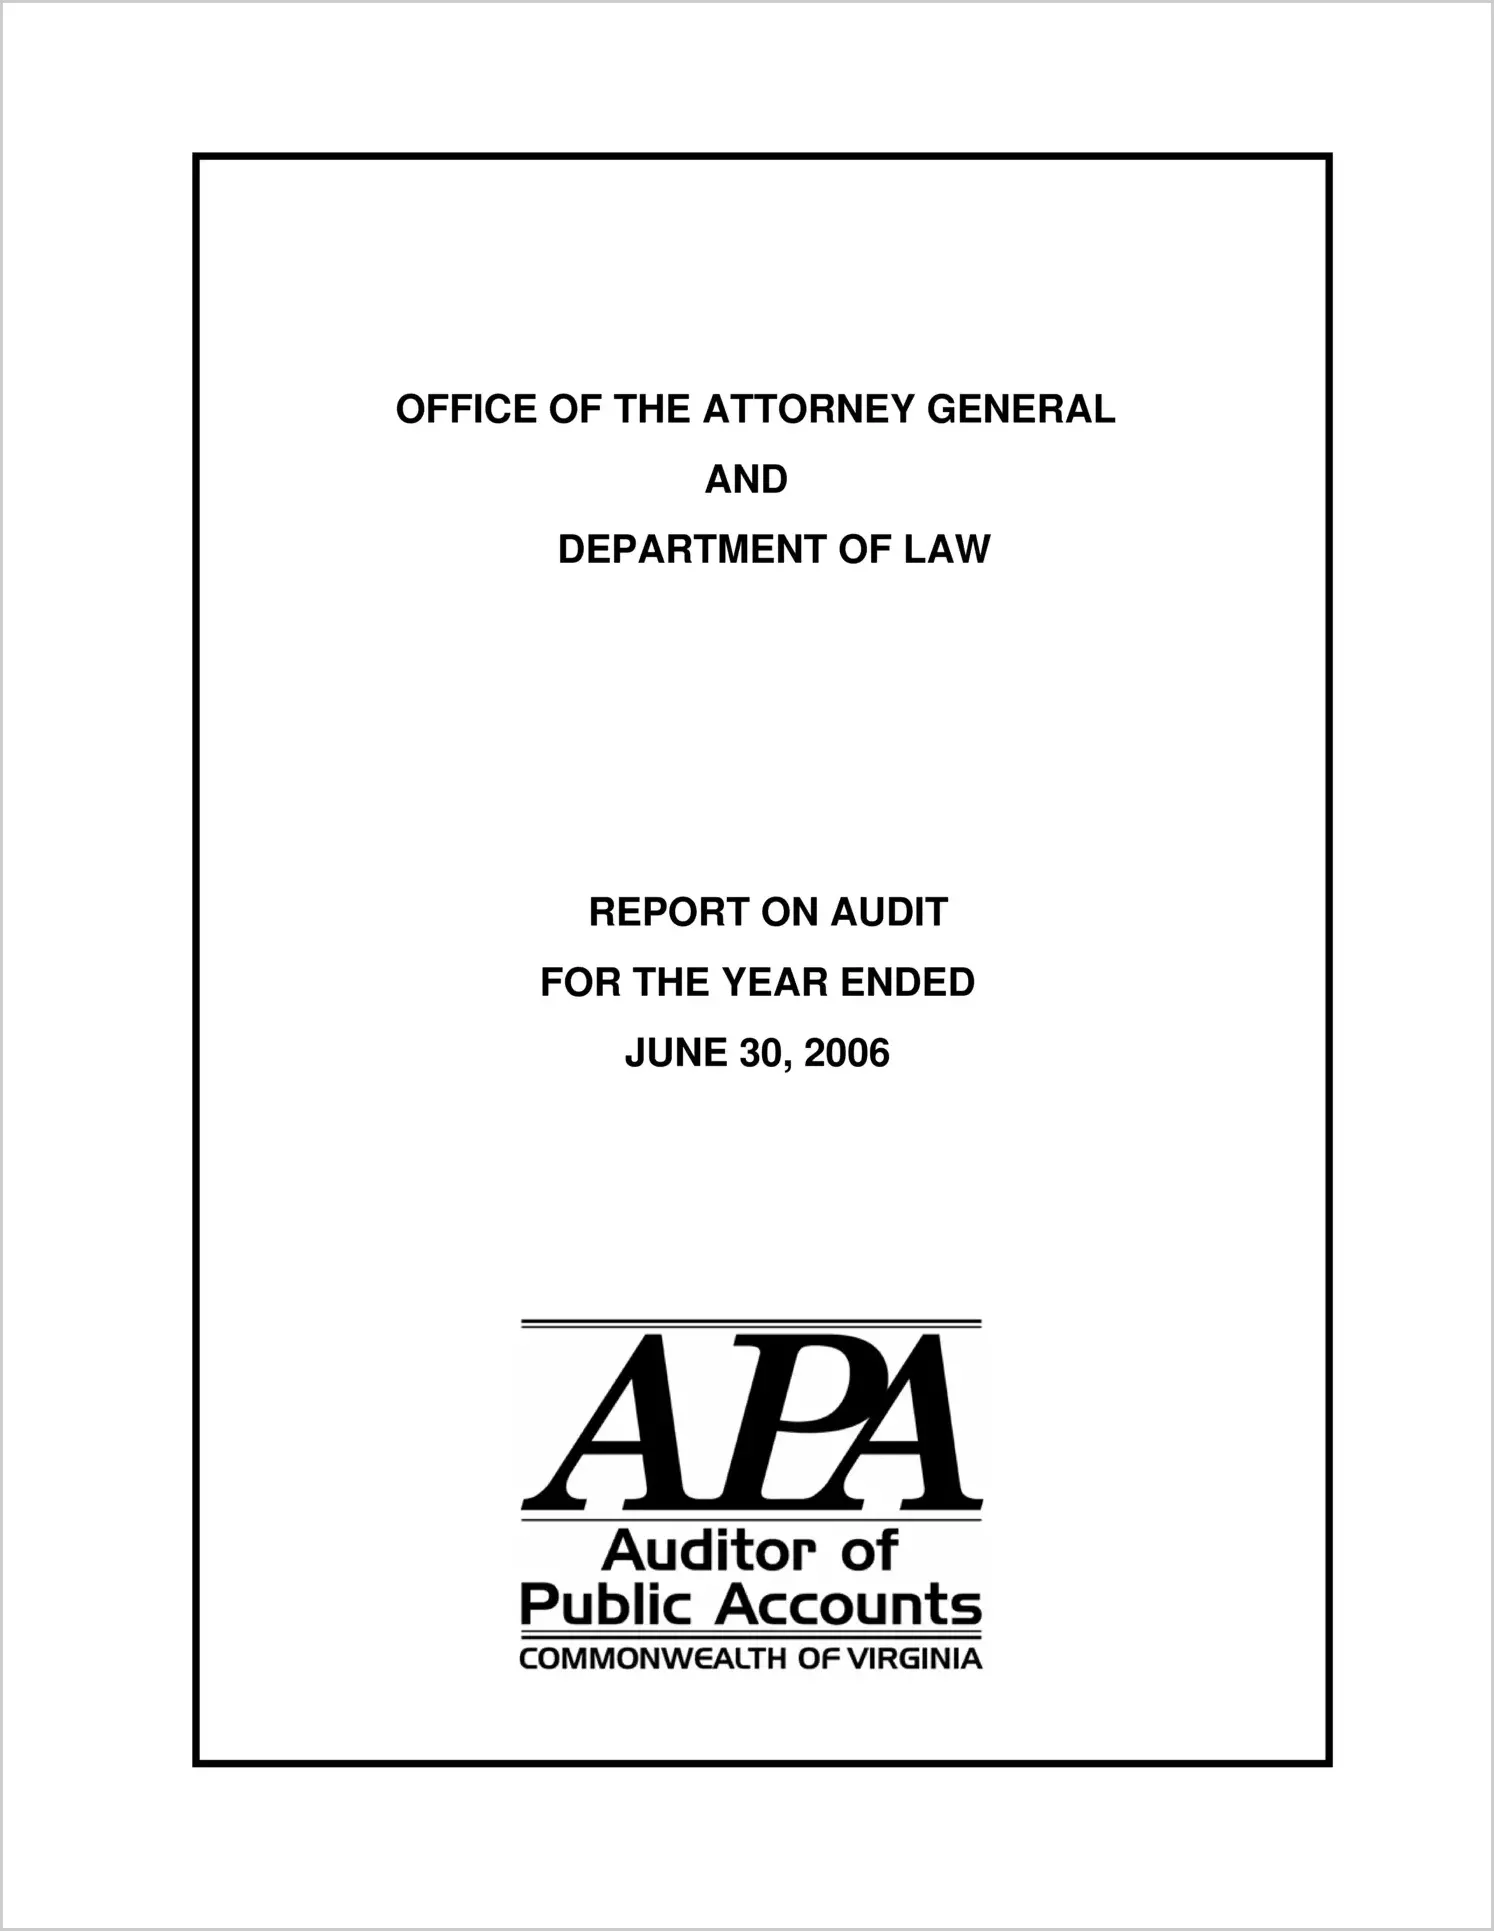 Office of the Attorney General and the Department of Law for the year ended June 30, 2006